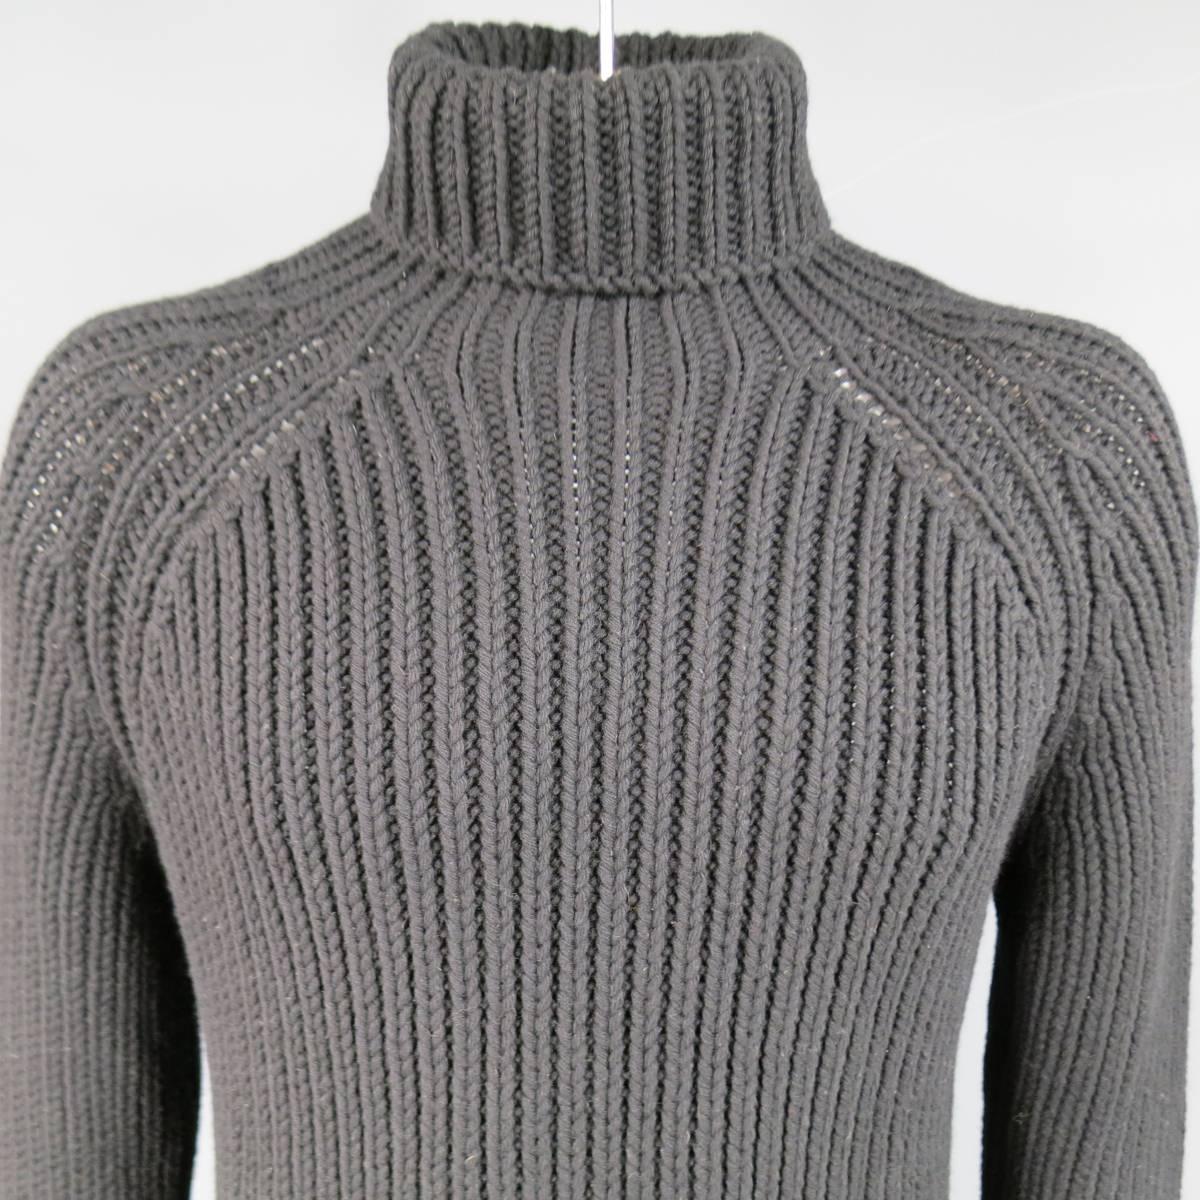 LOUIS VUITTON turtleneck sweater in a chunky cashmere blend knit featuring a fols over neck and raglan sleeves. Made in Italy.
 
Excellent Pre-Owned Condition.
Marked: (No Size)
 
Measurements:
 
Shoulder: 20 in.
Chest: 48 in.
Sleeve: 32